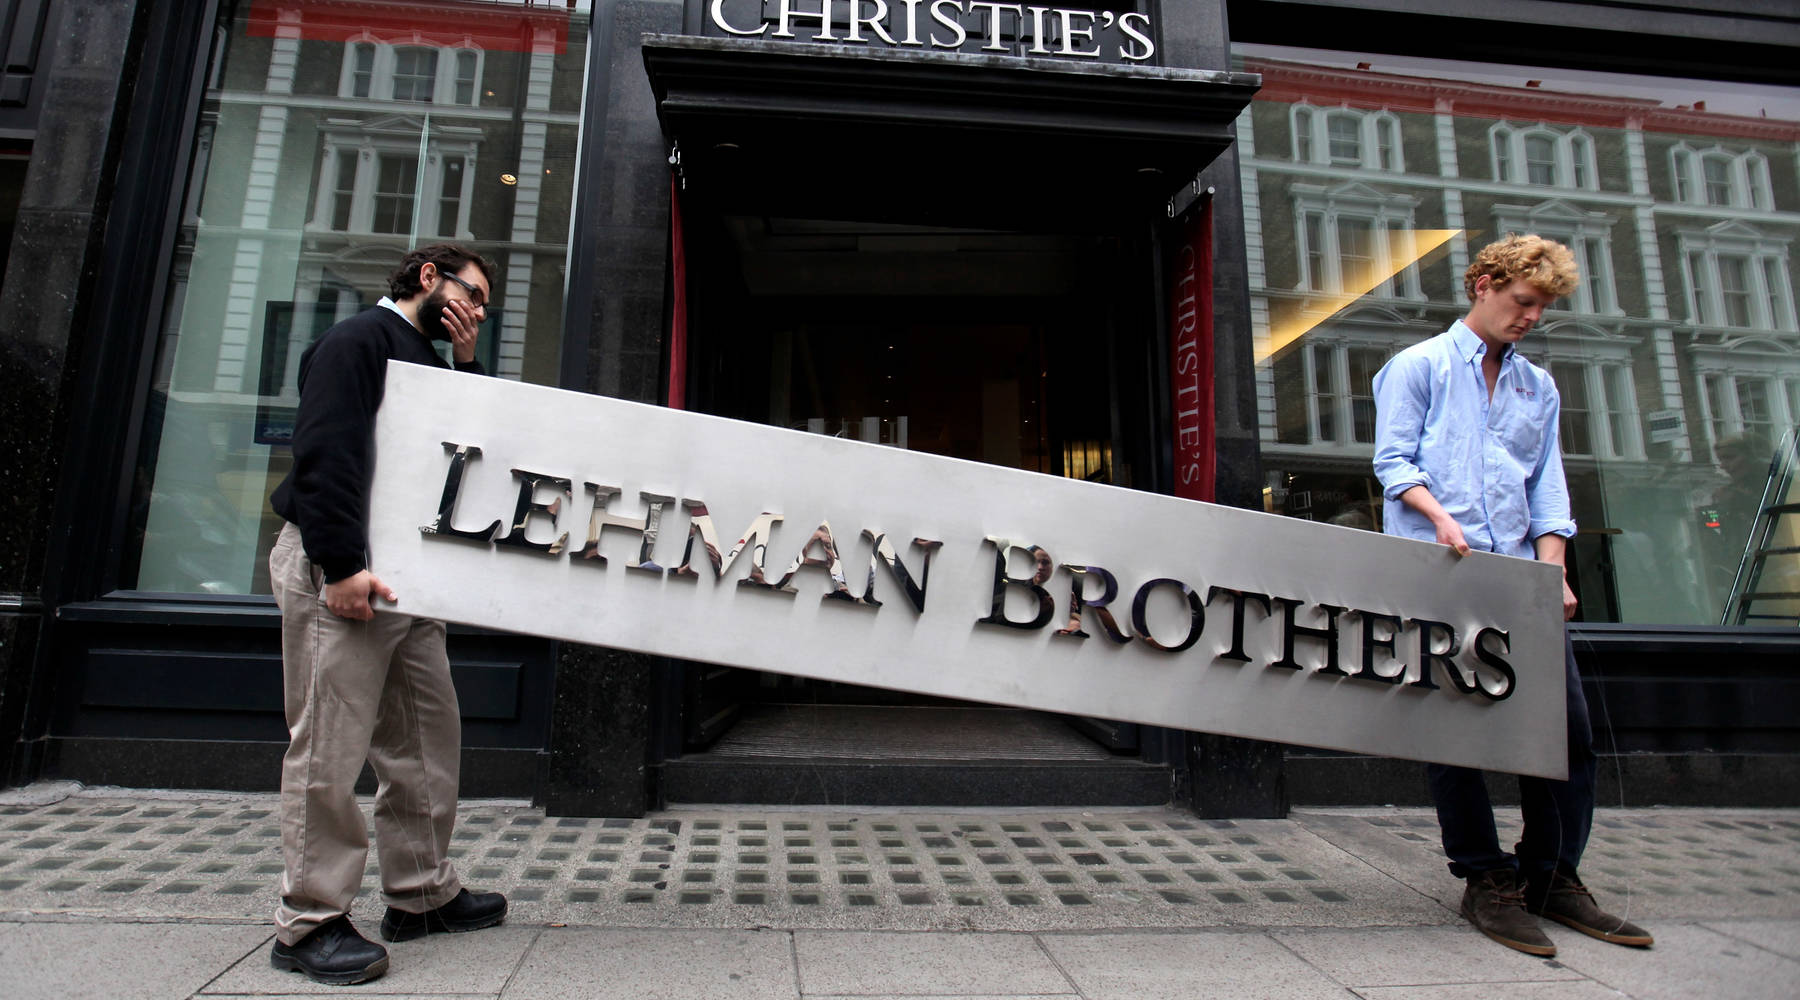 lehman brothers accounting scandal